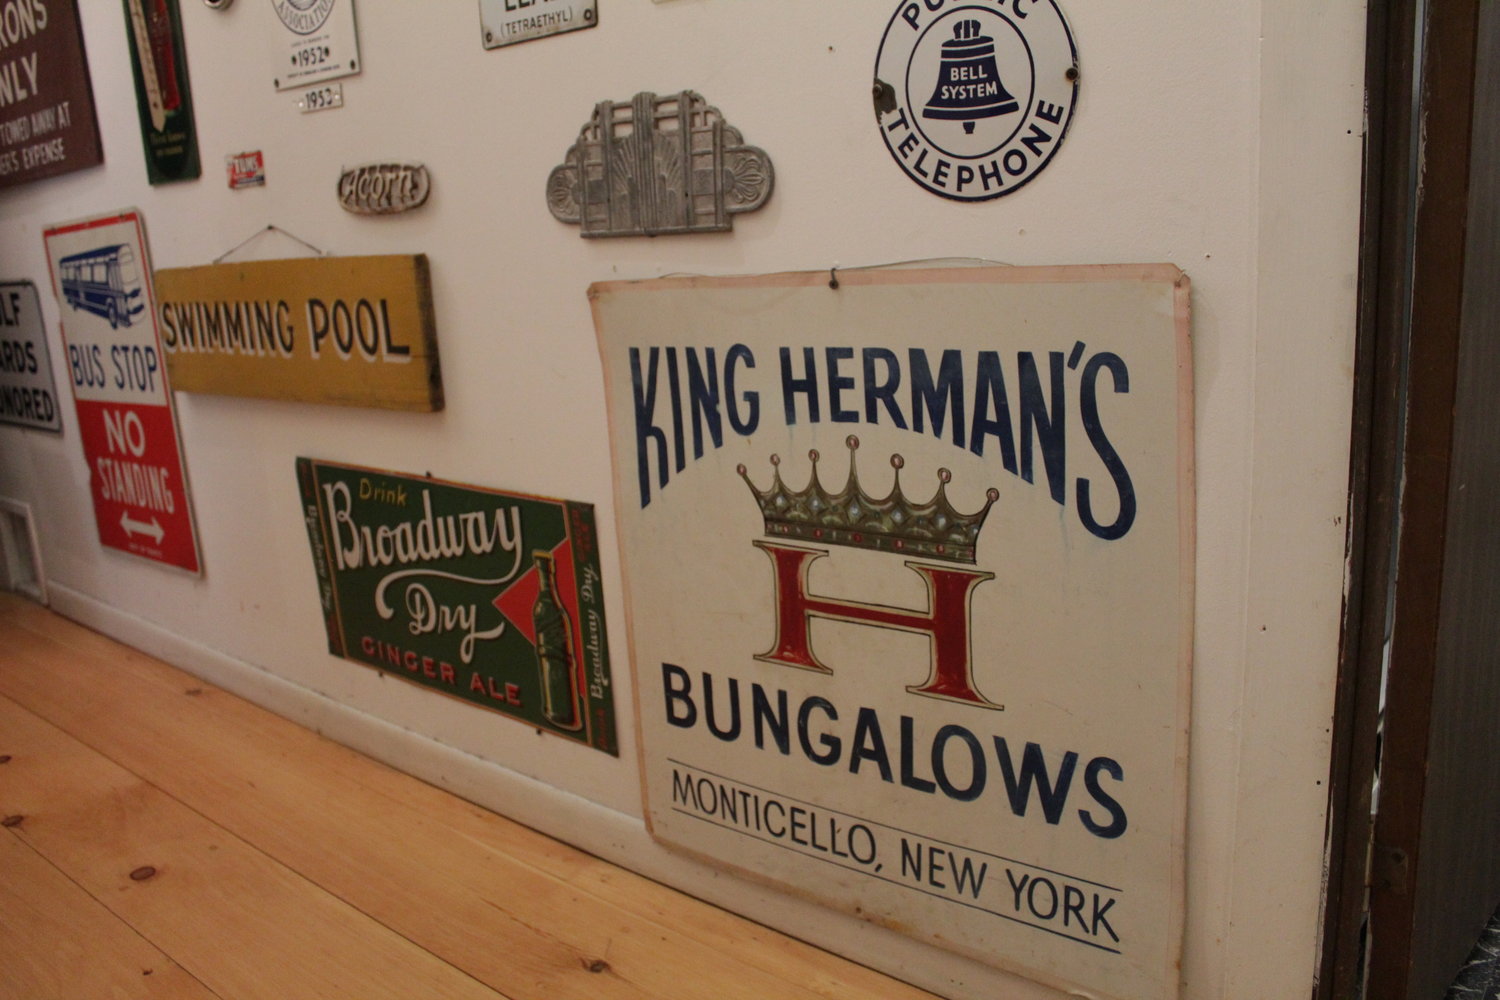 Frishman found the abandoned King Herman Bungalows sign, rescued it and brought it home. King Herman deserved better.